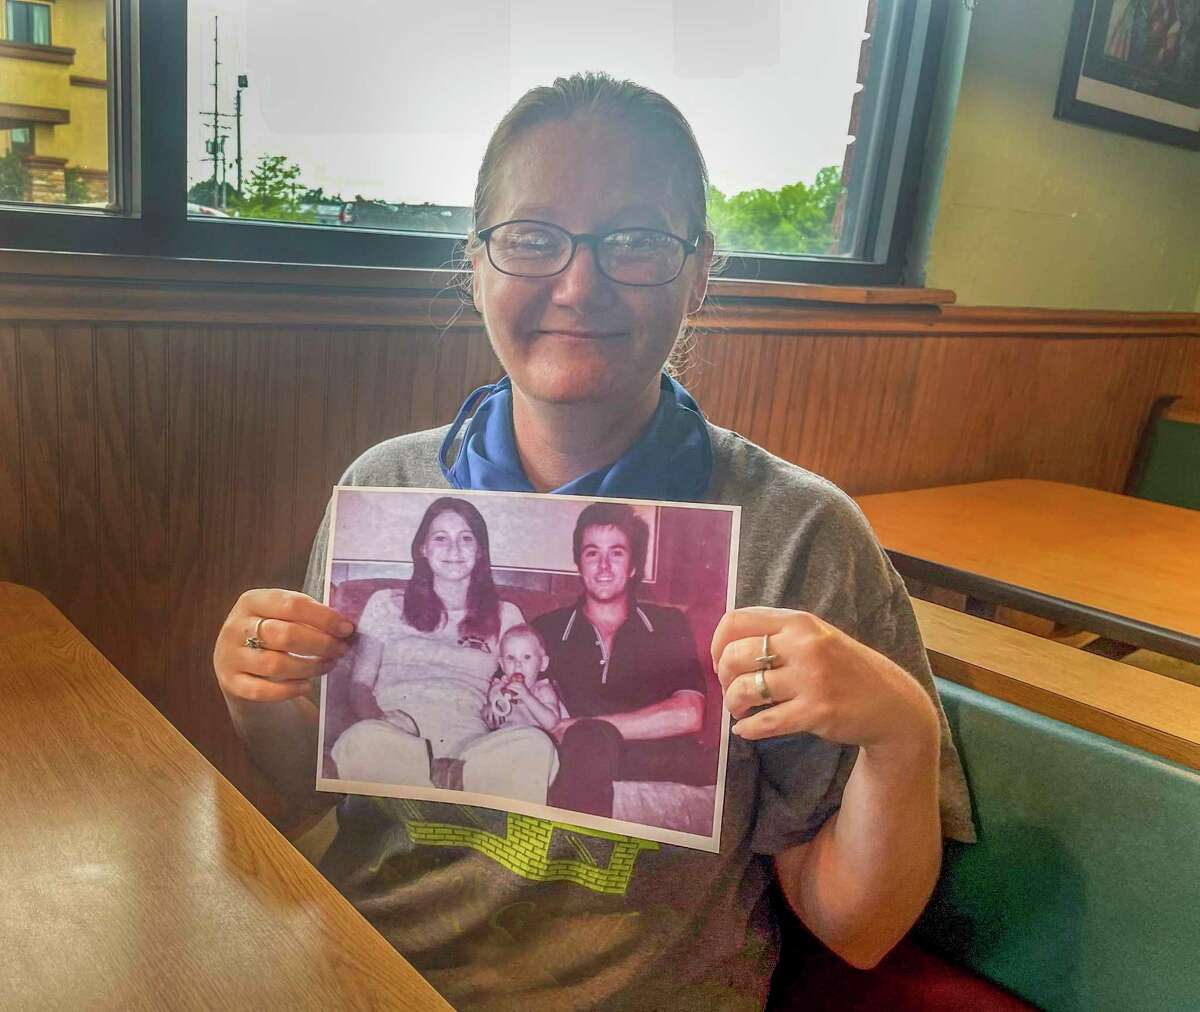 Holly Marie holds a picture of herself as a baby with her late parents, Harold Dean Clouse and Tina Gail Linn.